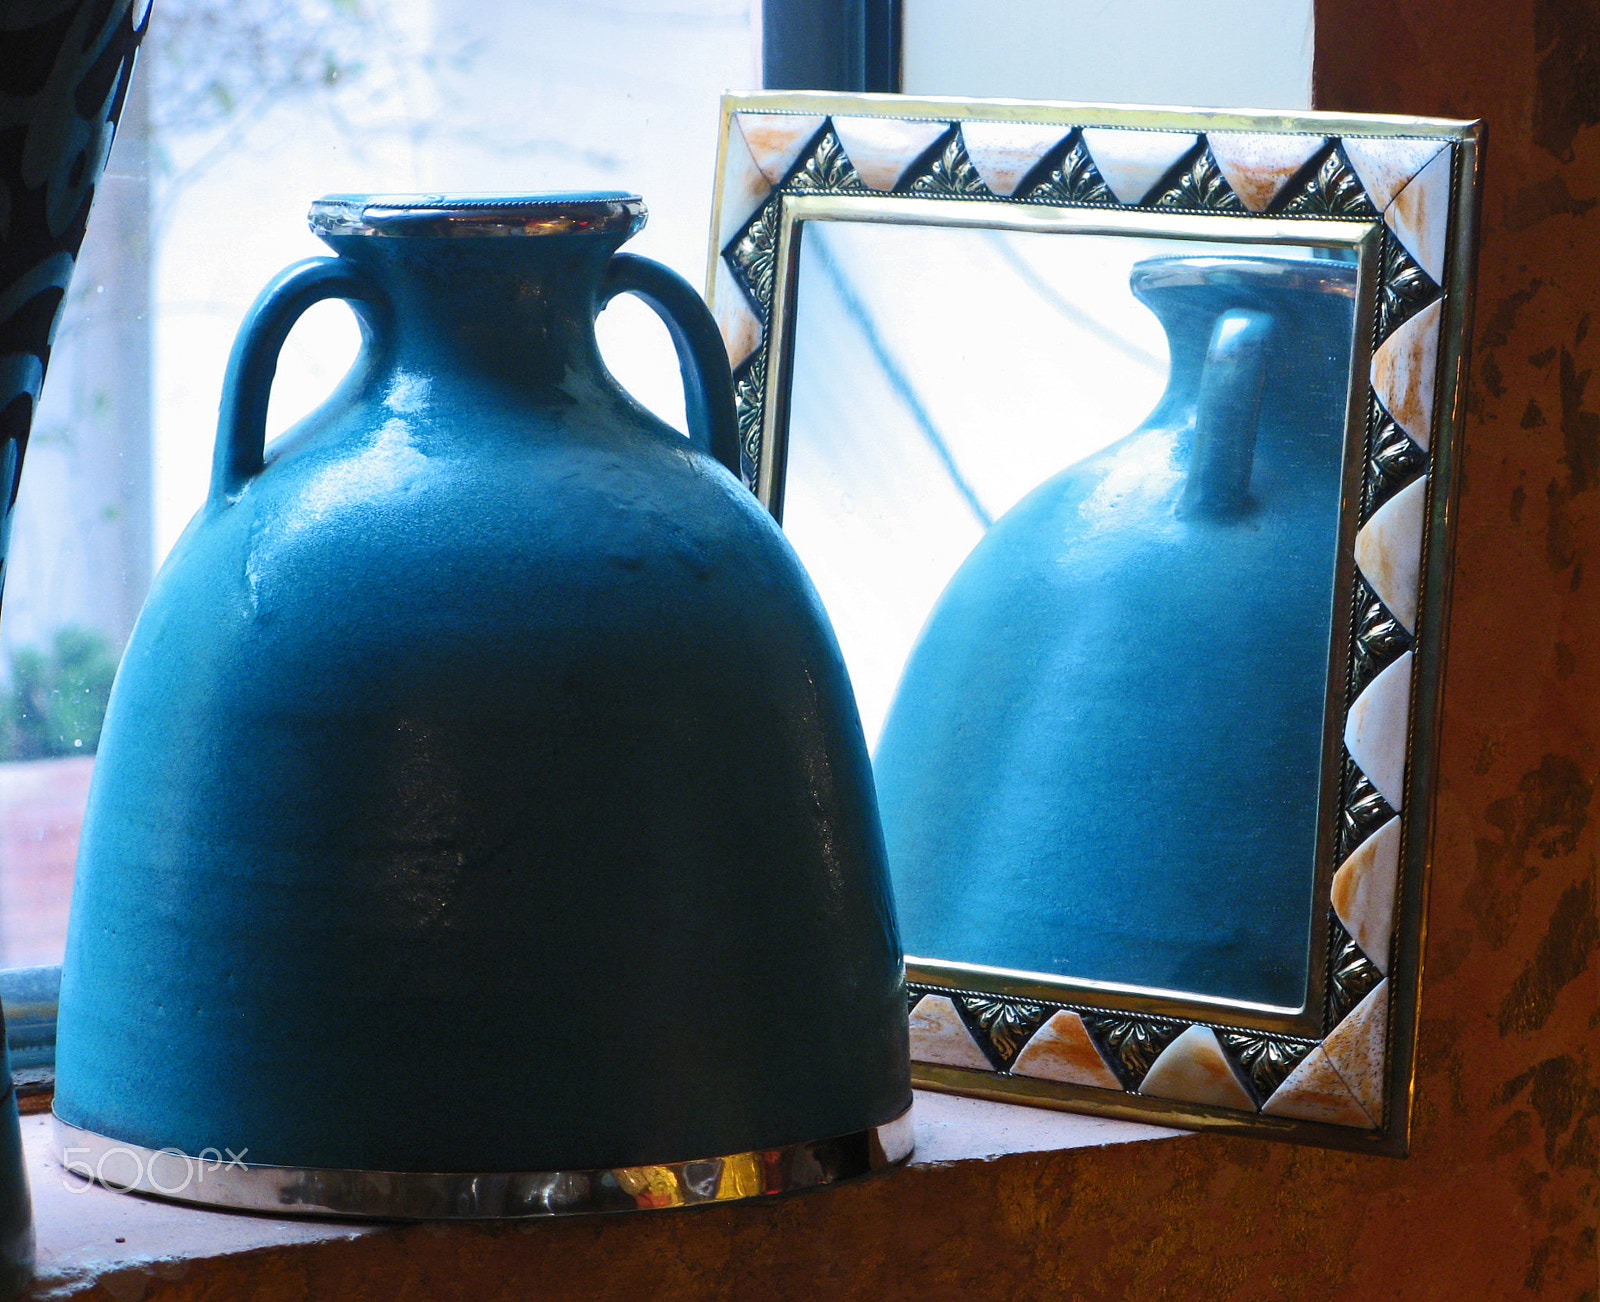 Canon POWERSHOT A710 IS sample photo. Still life with blue ceramic vase and mirror on the window photography